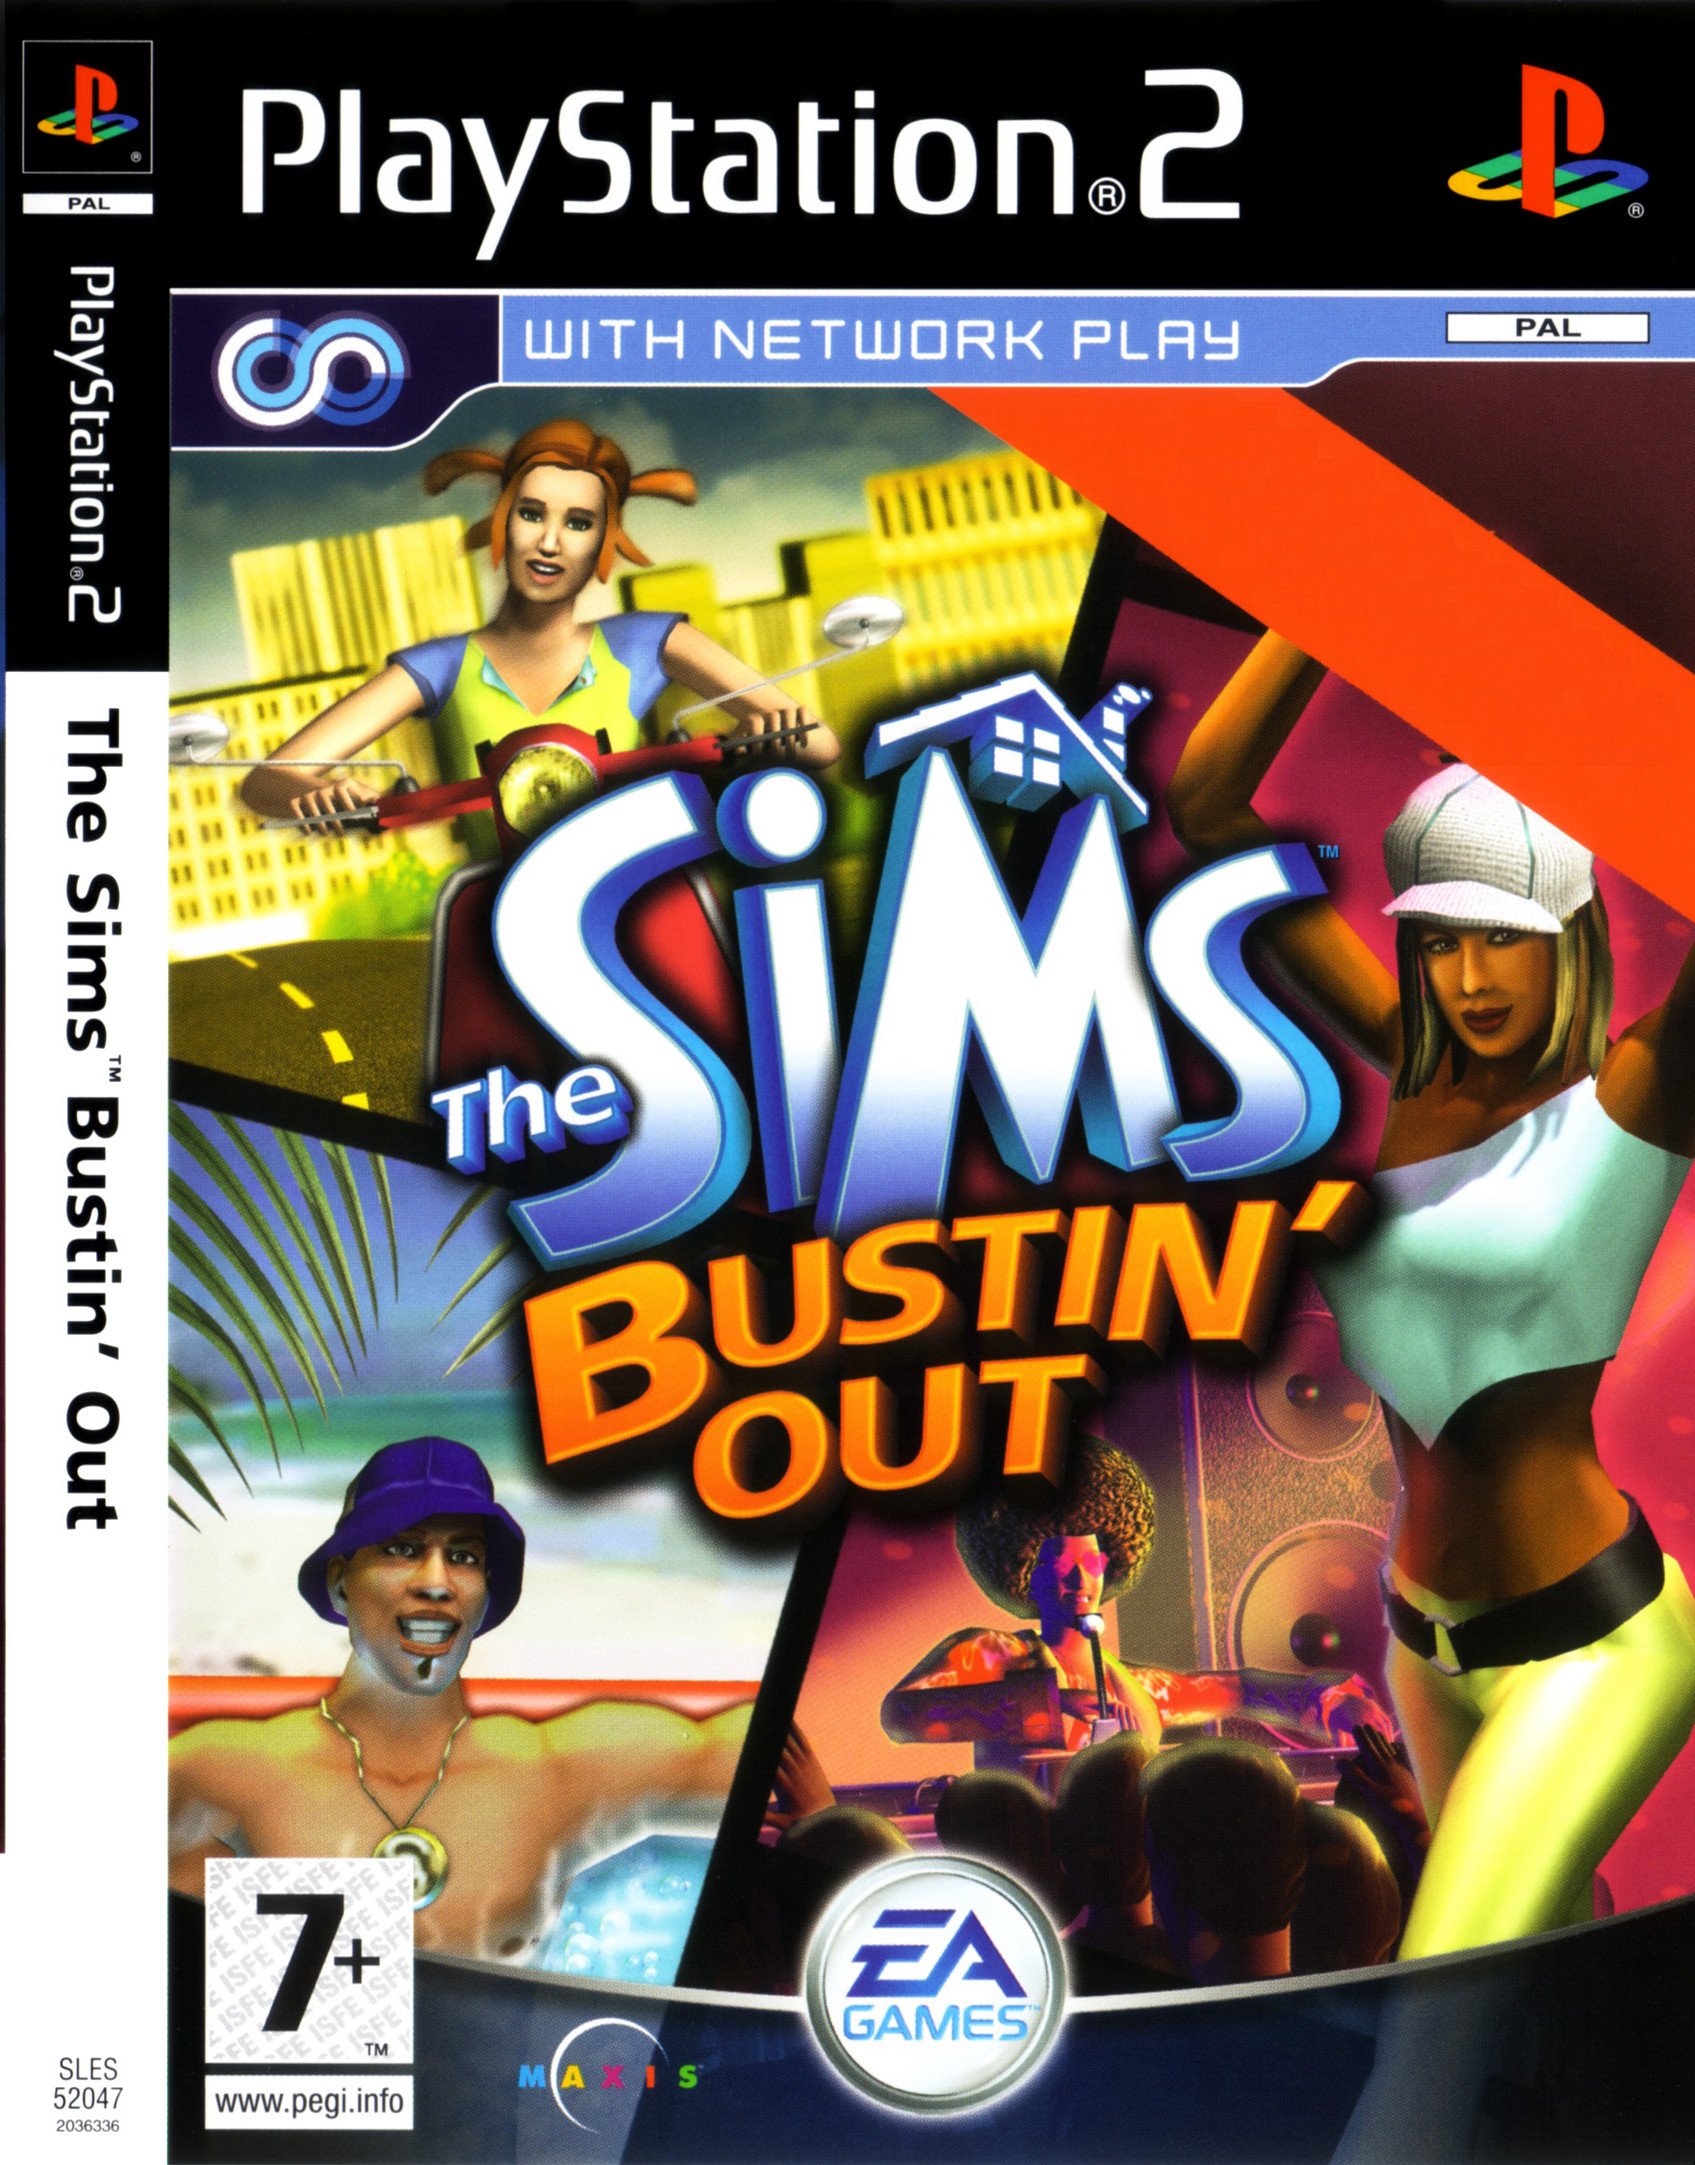 The sims bustin